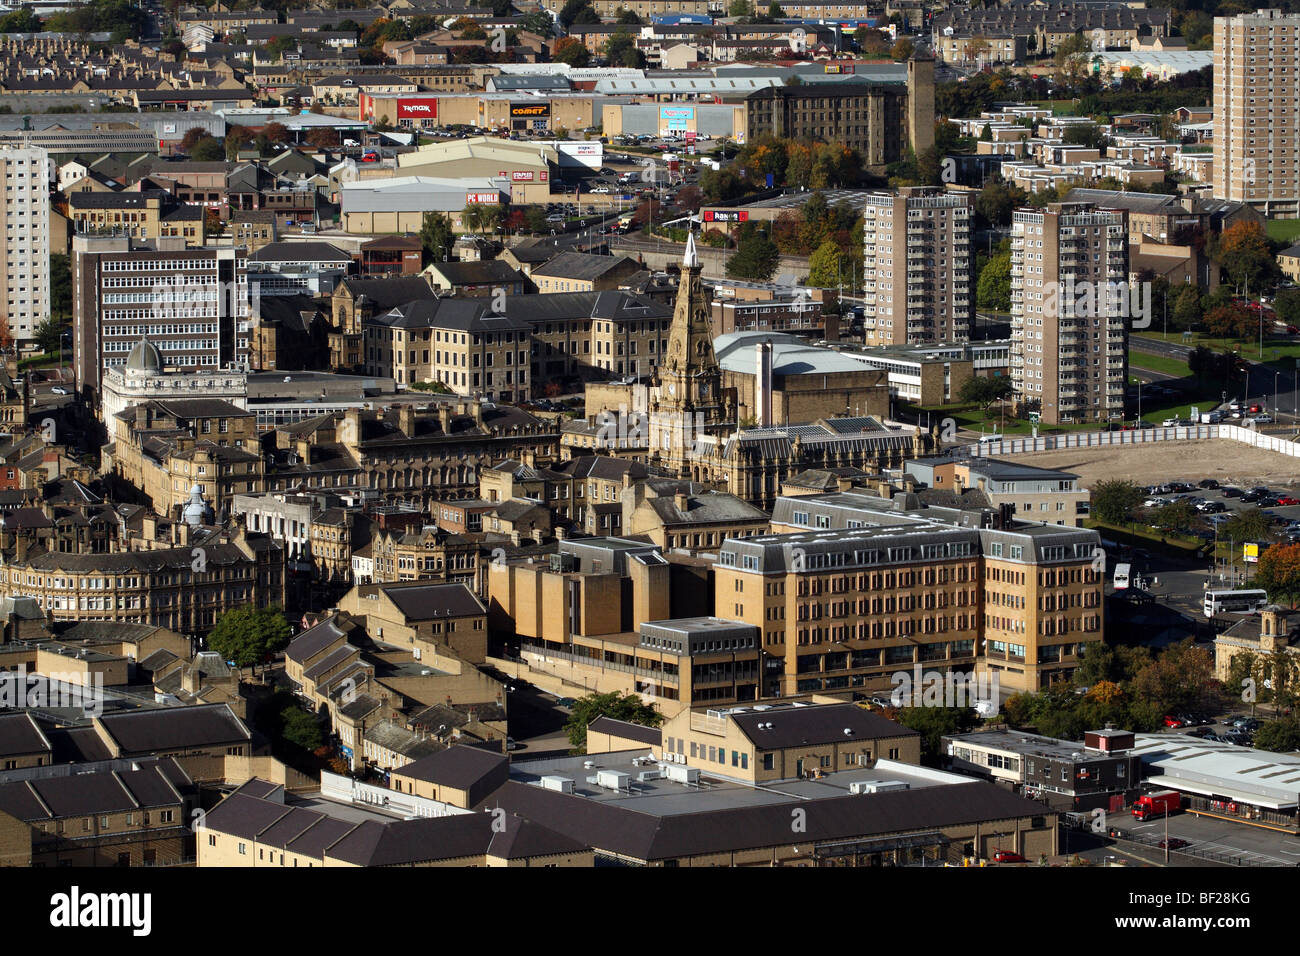 Halifax Civic Buildings Town Hall and surrounds Yorkshire UK Stock Photo